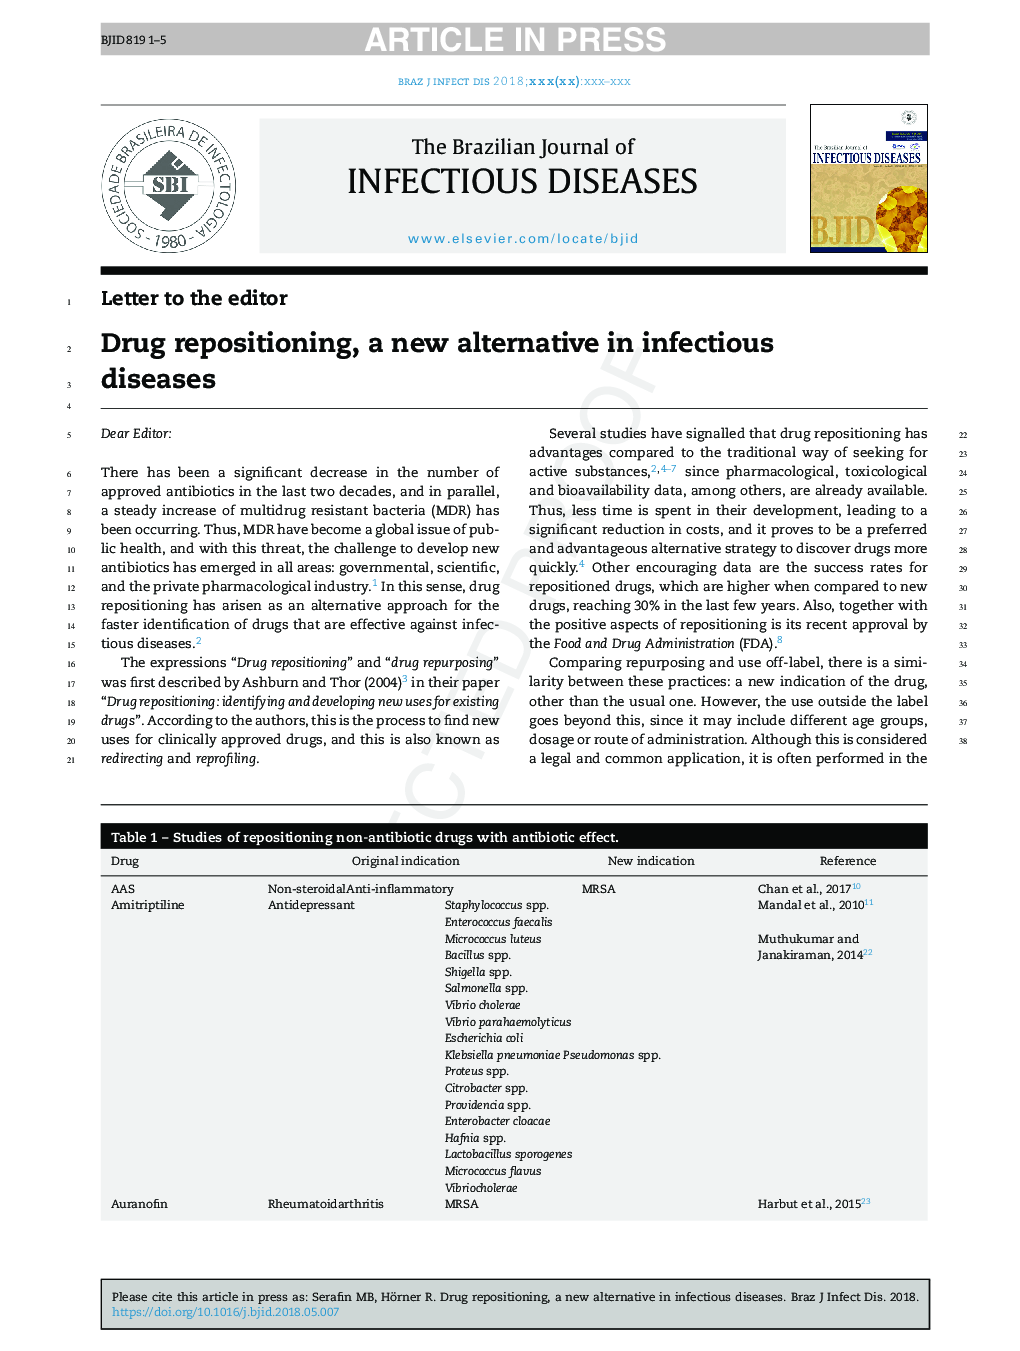 Drug repositioning, a new alternative in infectious diseases